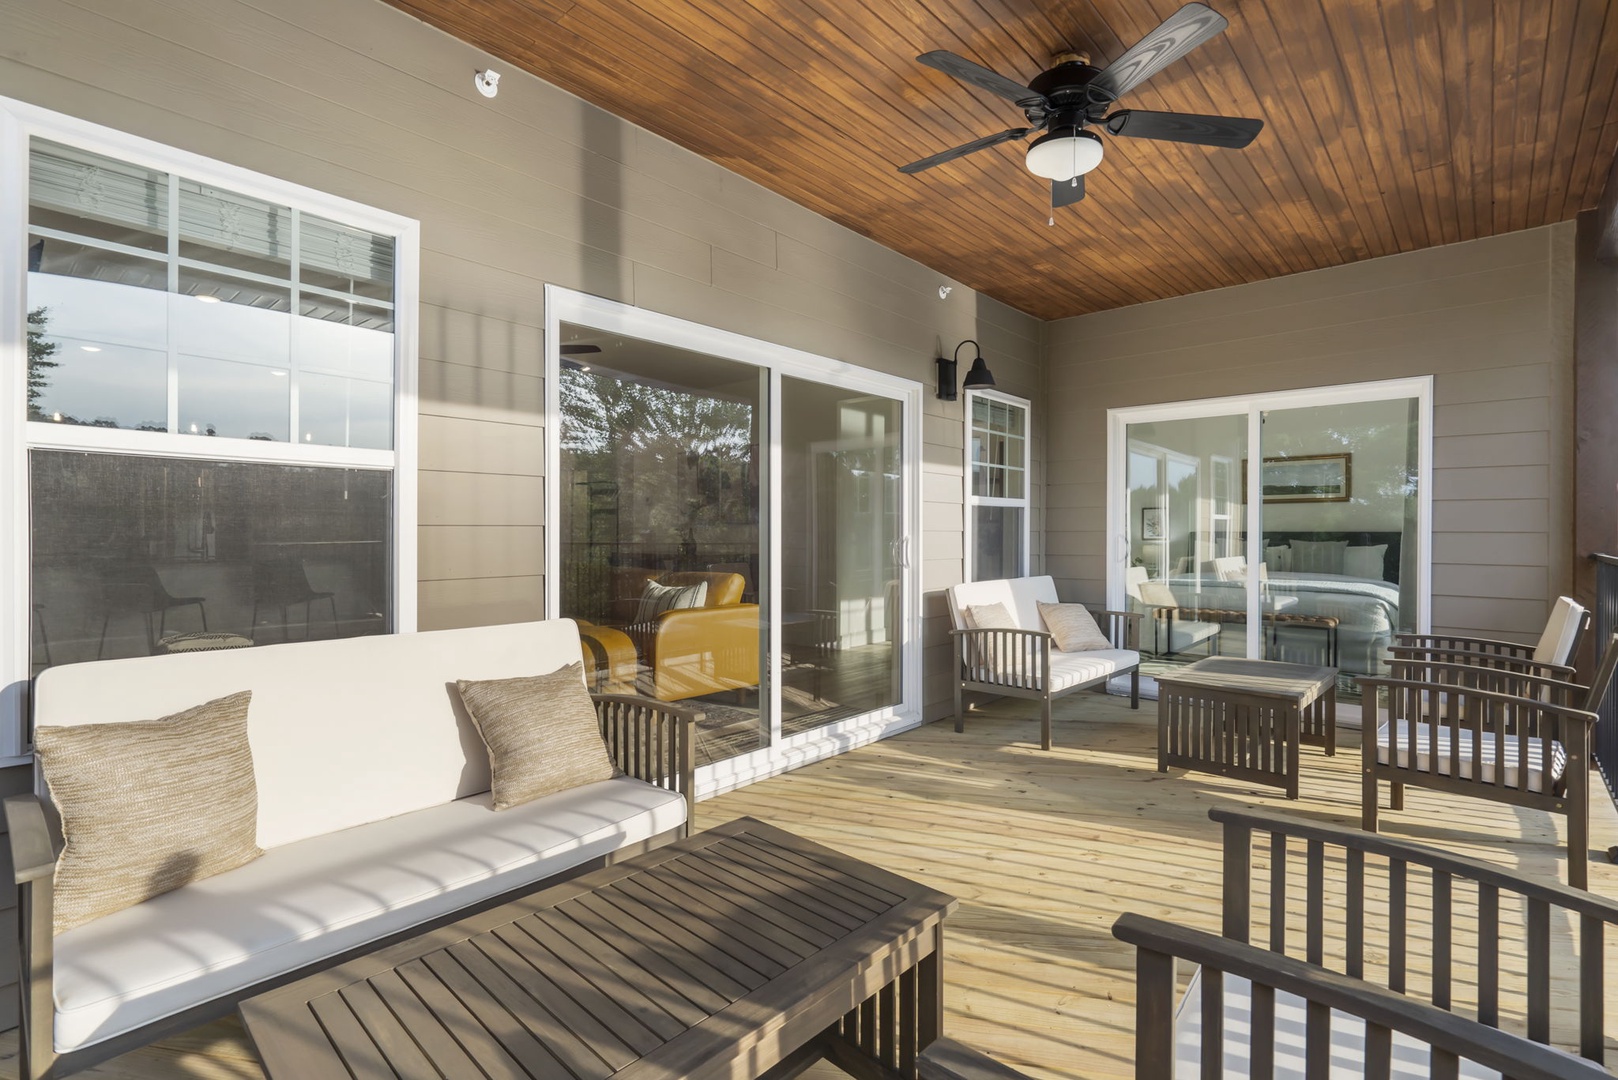 Take in the stunning views while lounging on the private back deck